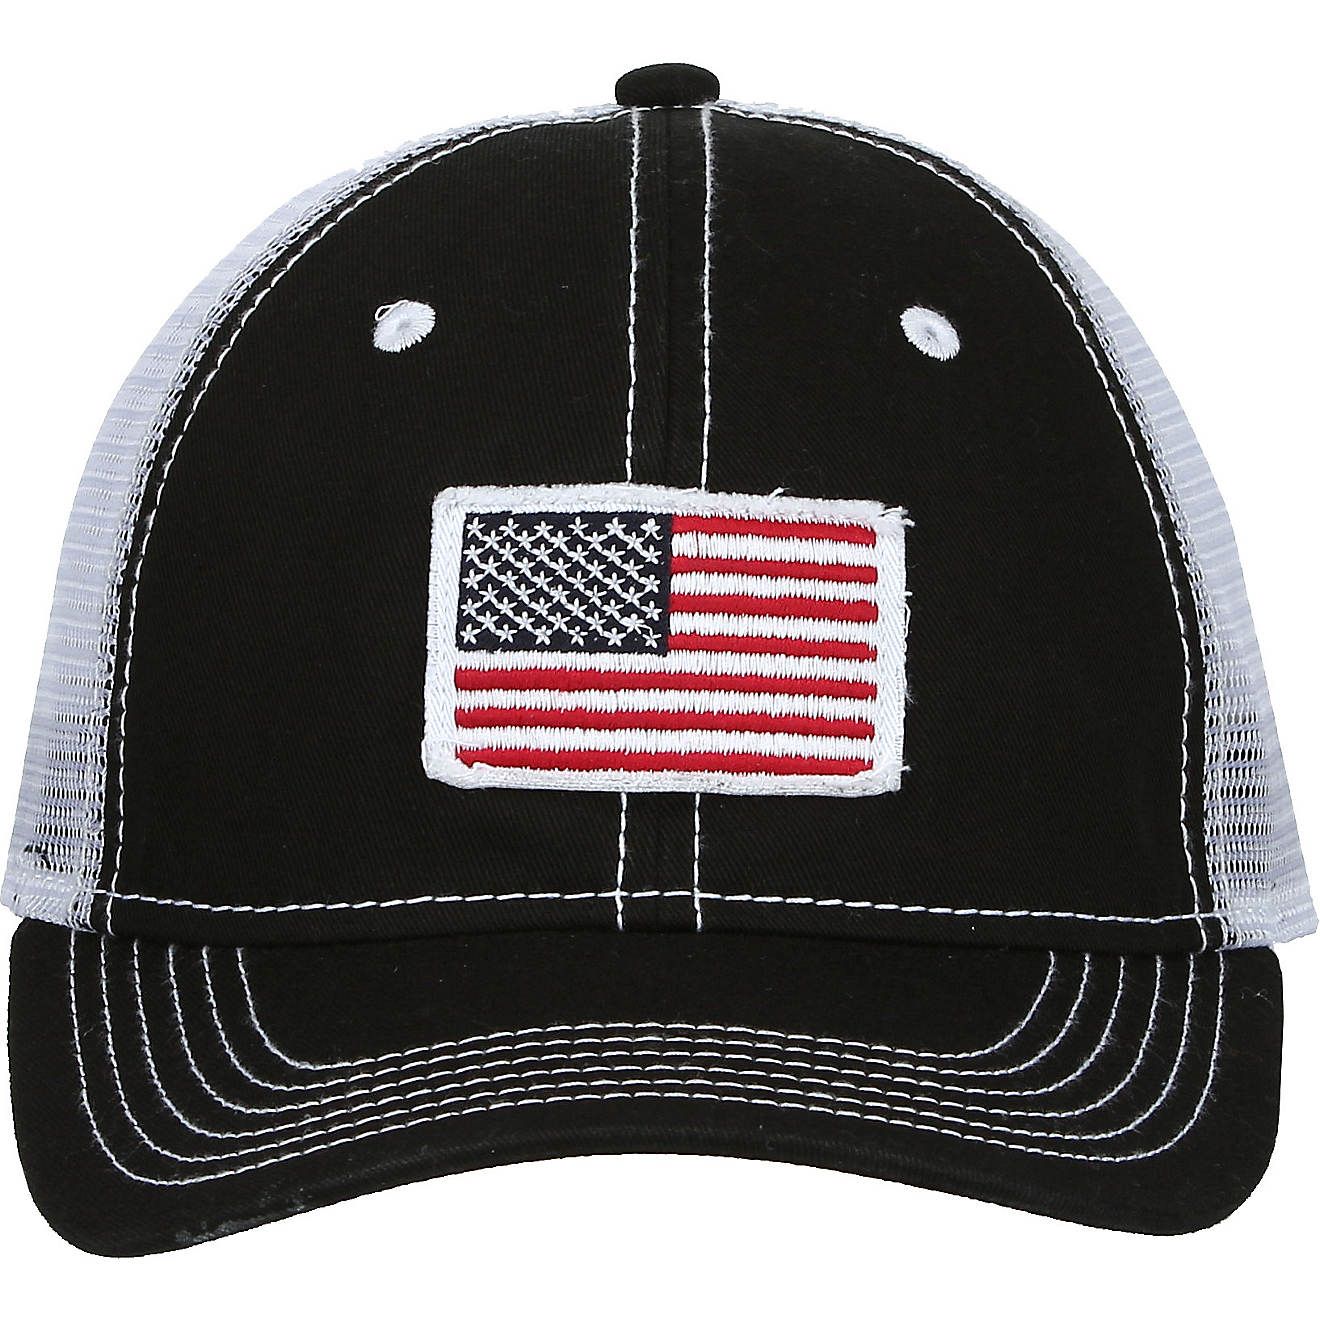 Academy Sports + Outdoors Men's American Flag Trucker Hat | Academy | Academy Sports + Outdoors